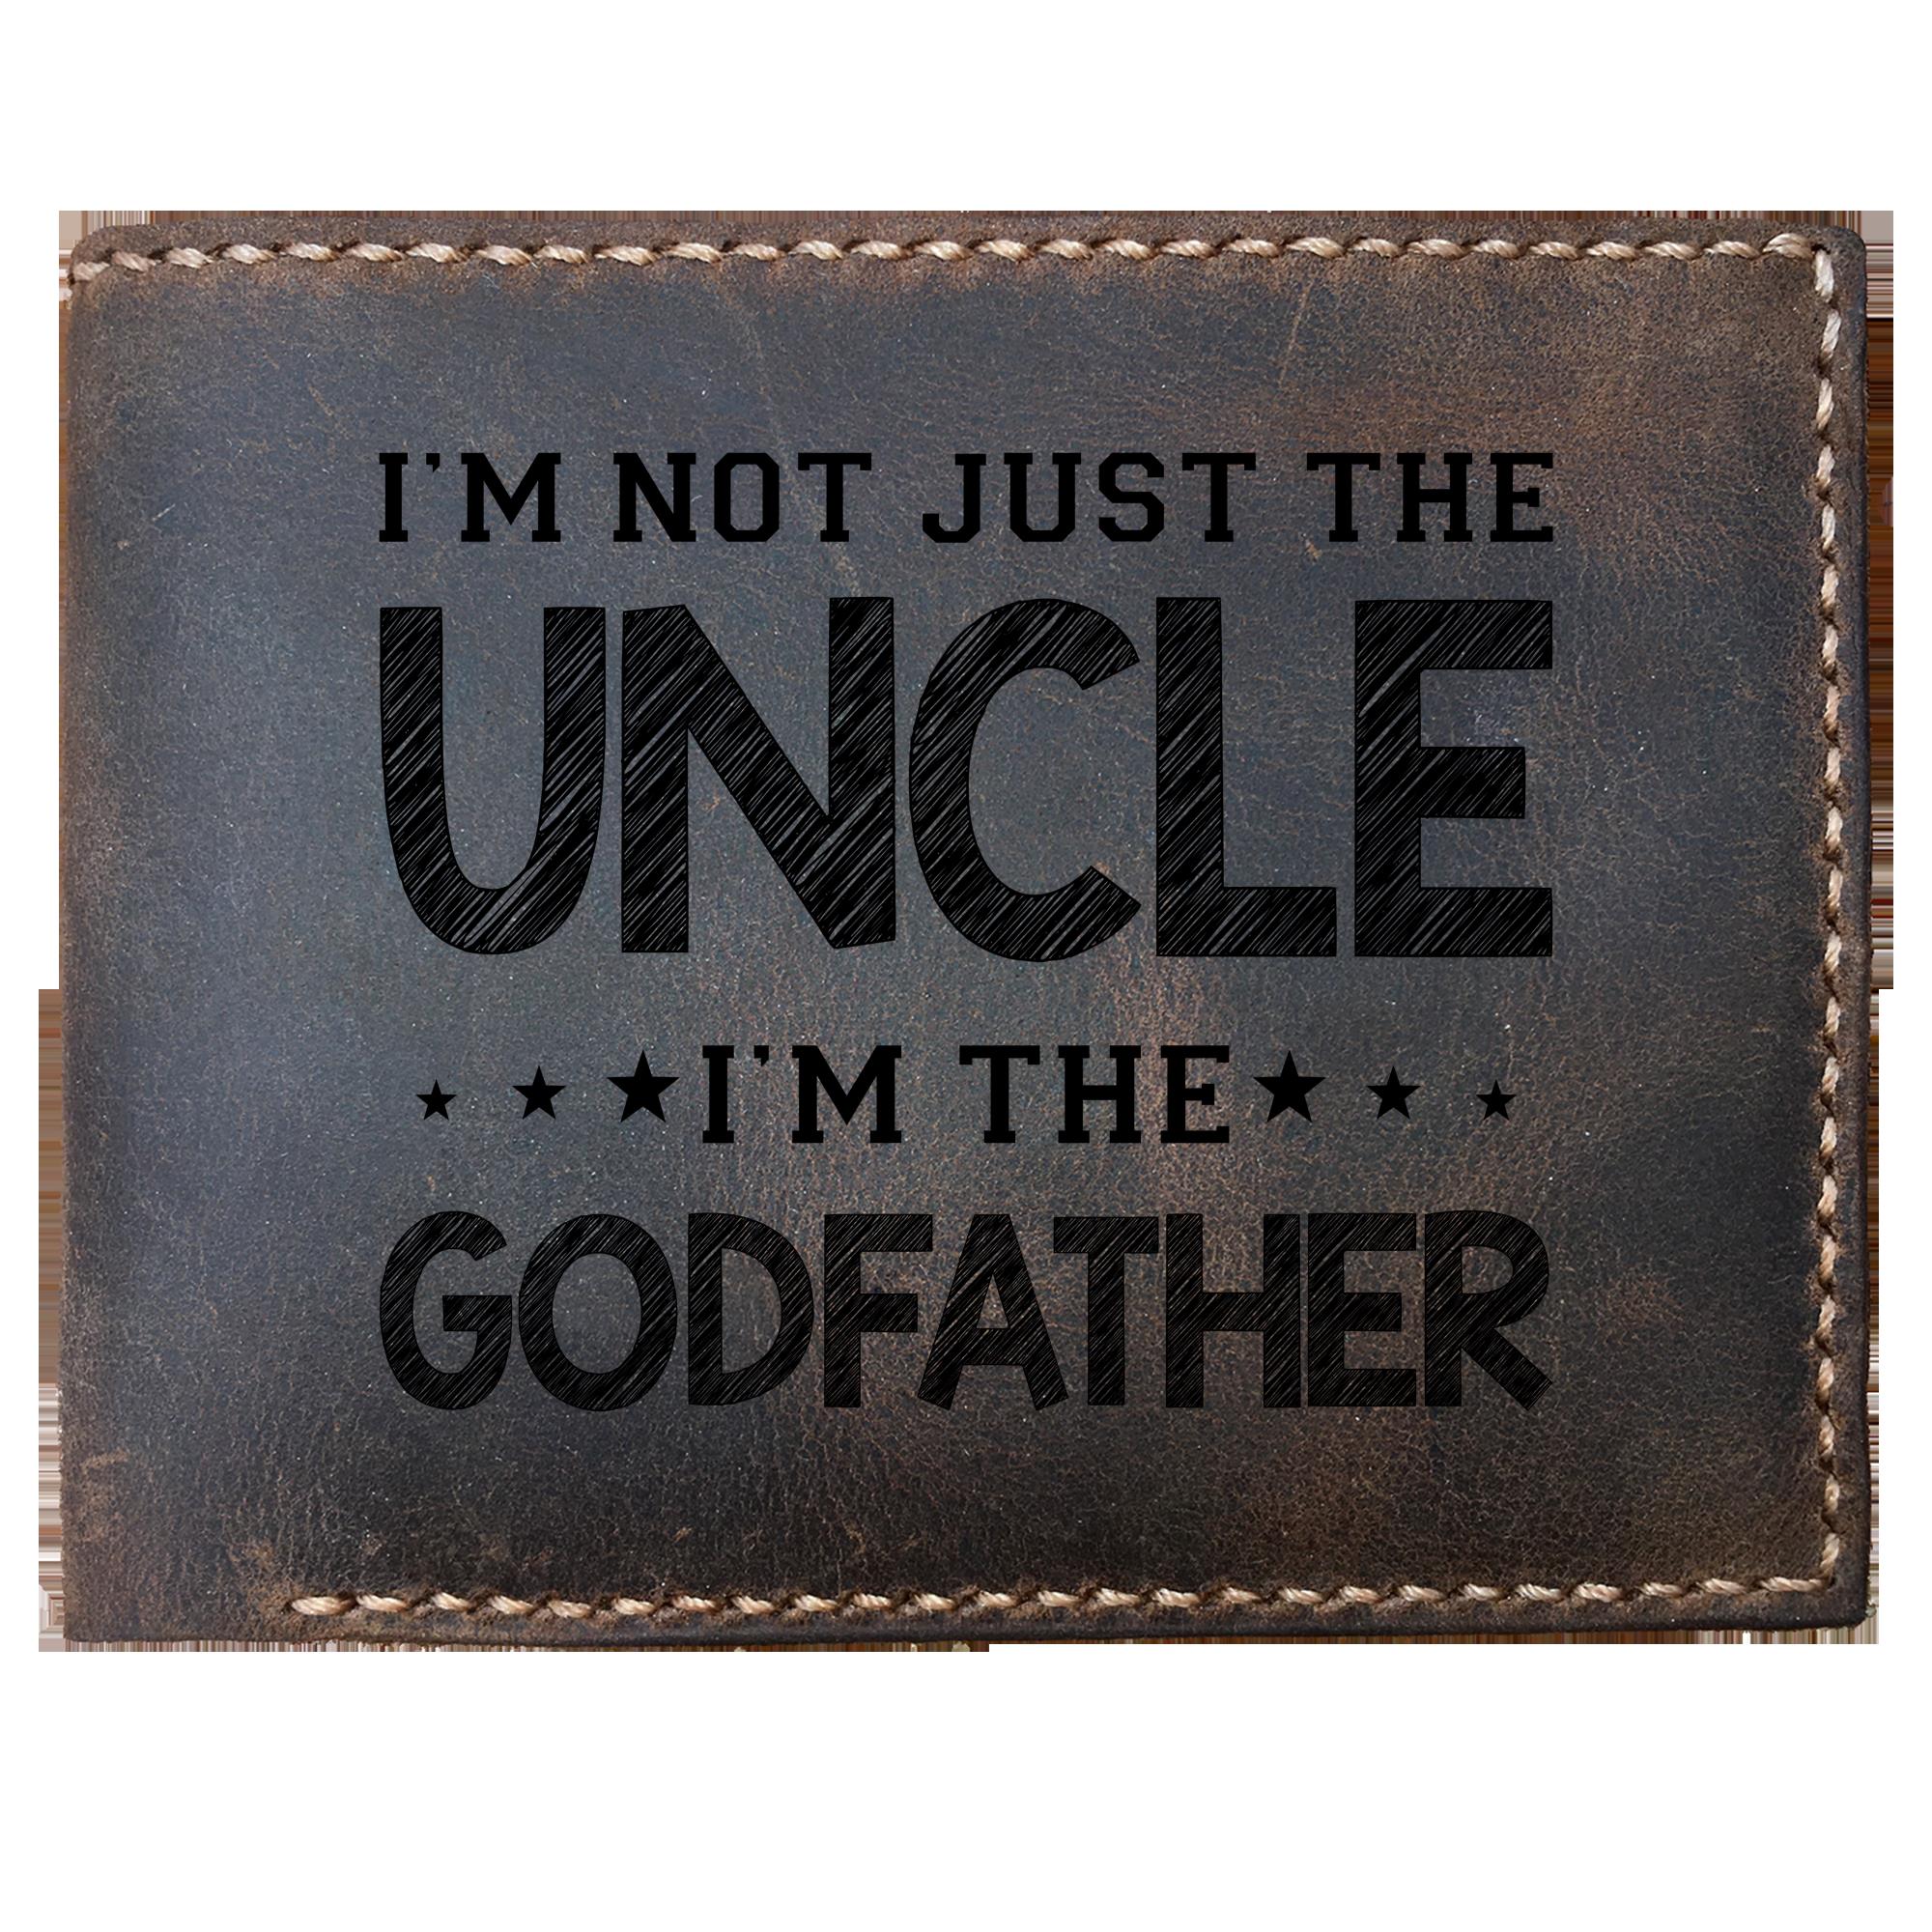 Skitongifts Funny Custom Laser Engraved Bifold Leather Wallet For Men, Funny I Am Not Just The Uncle I Am The Godfather